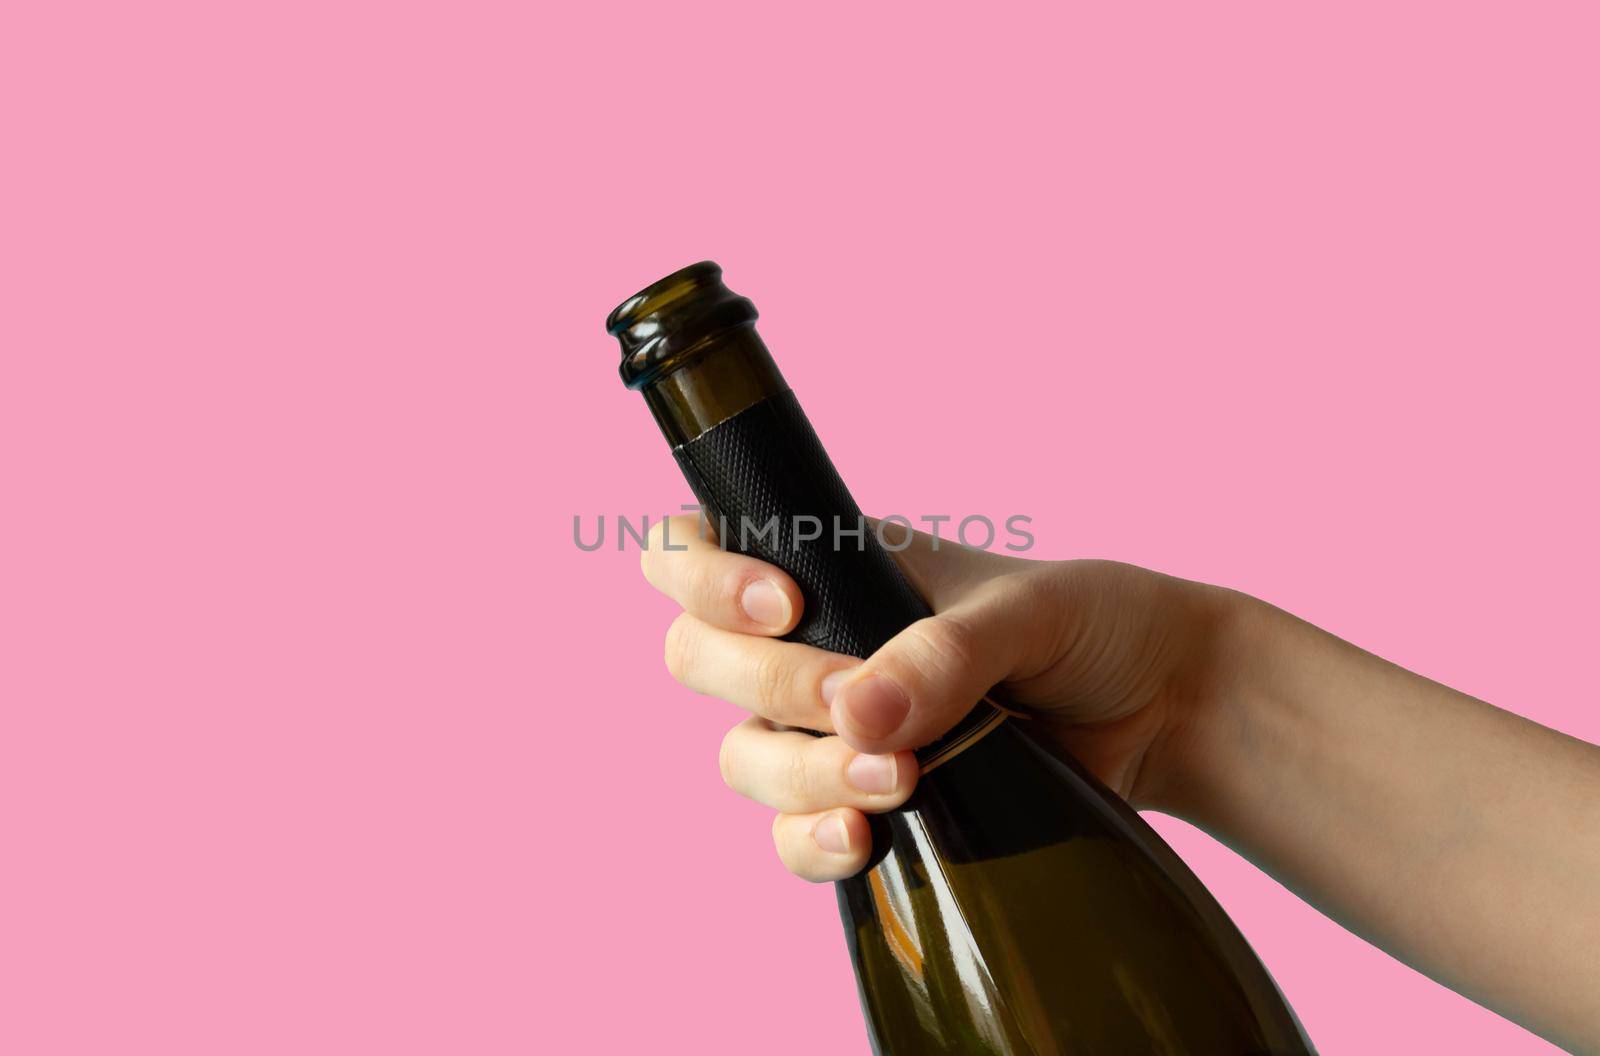 A woman's hand holding an open bottle of champagne on a pink background by lapushka62